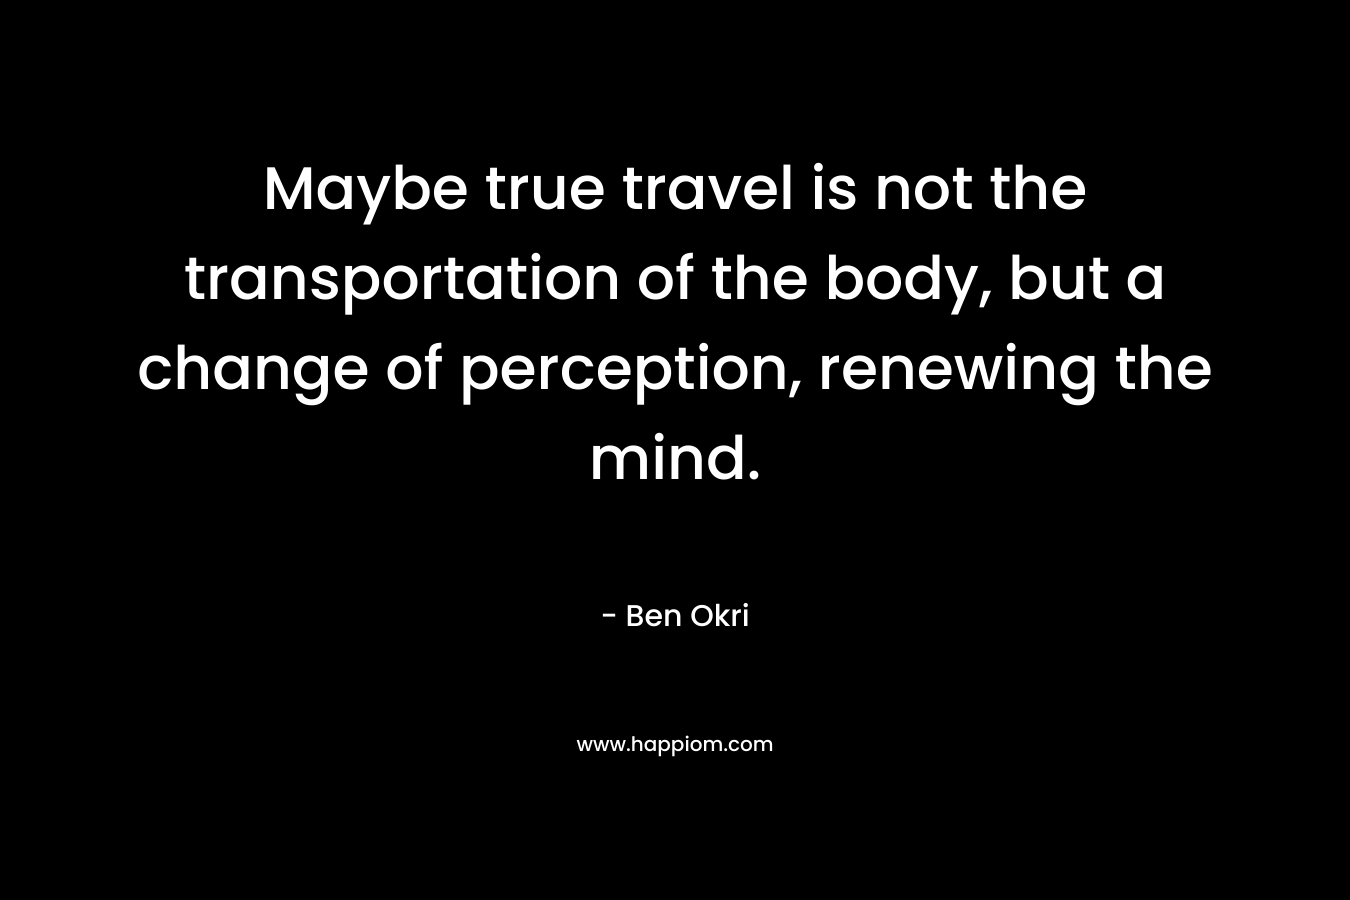 Maybe true travel is not the transportation of the body, but a change of perception, renewing the mind.